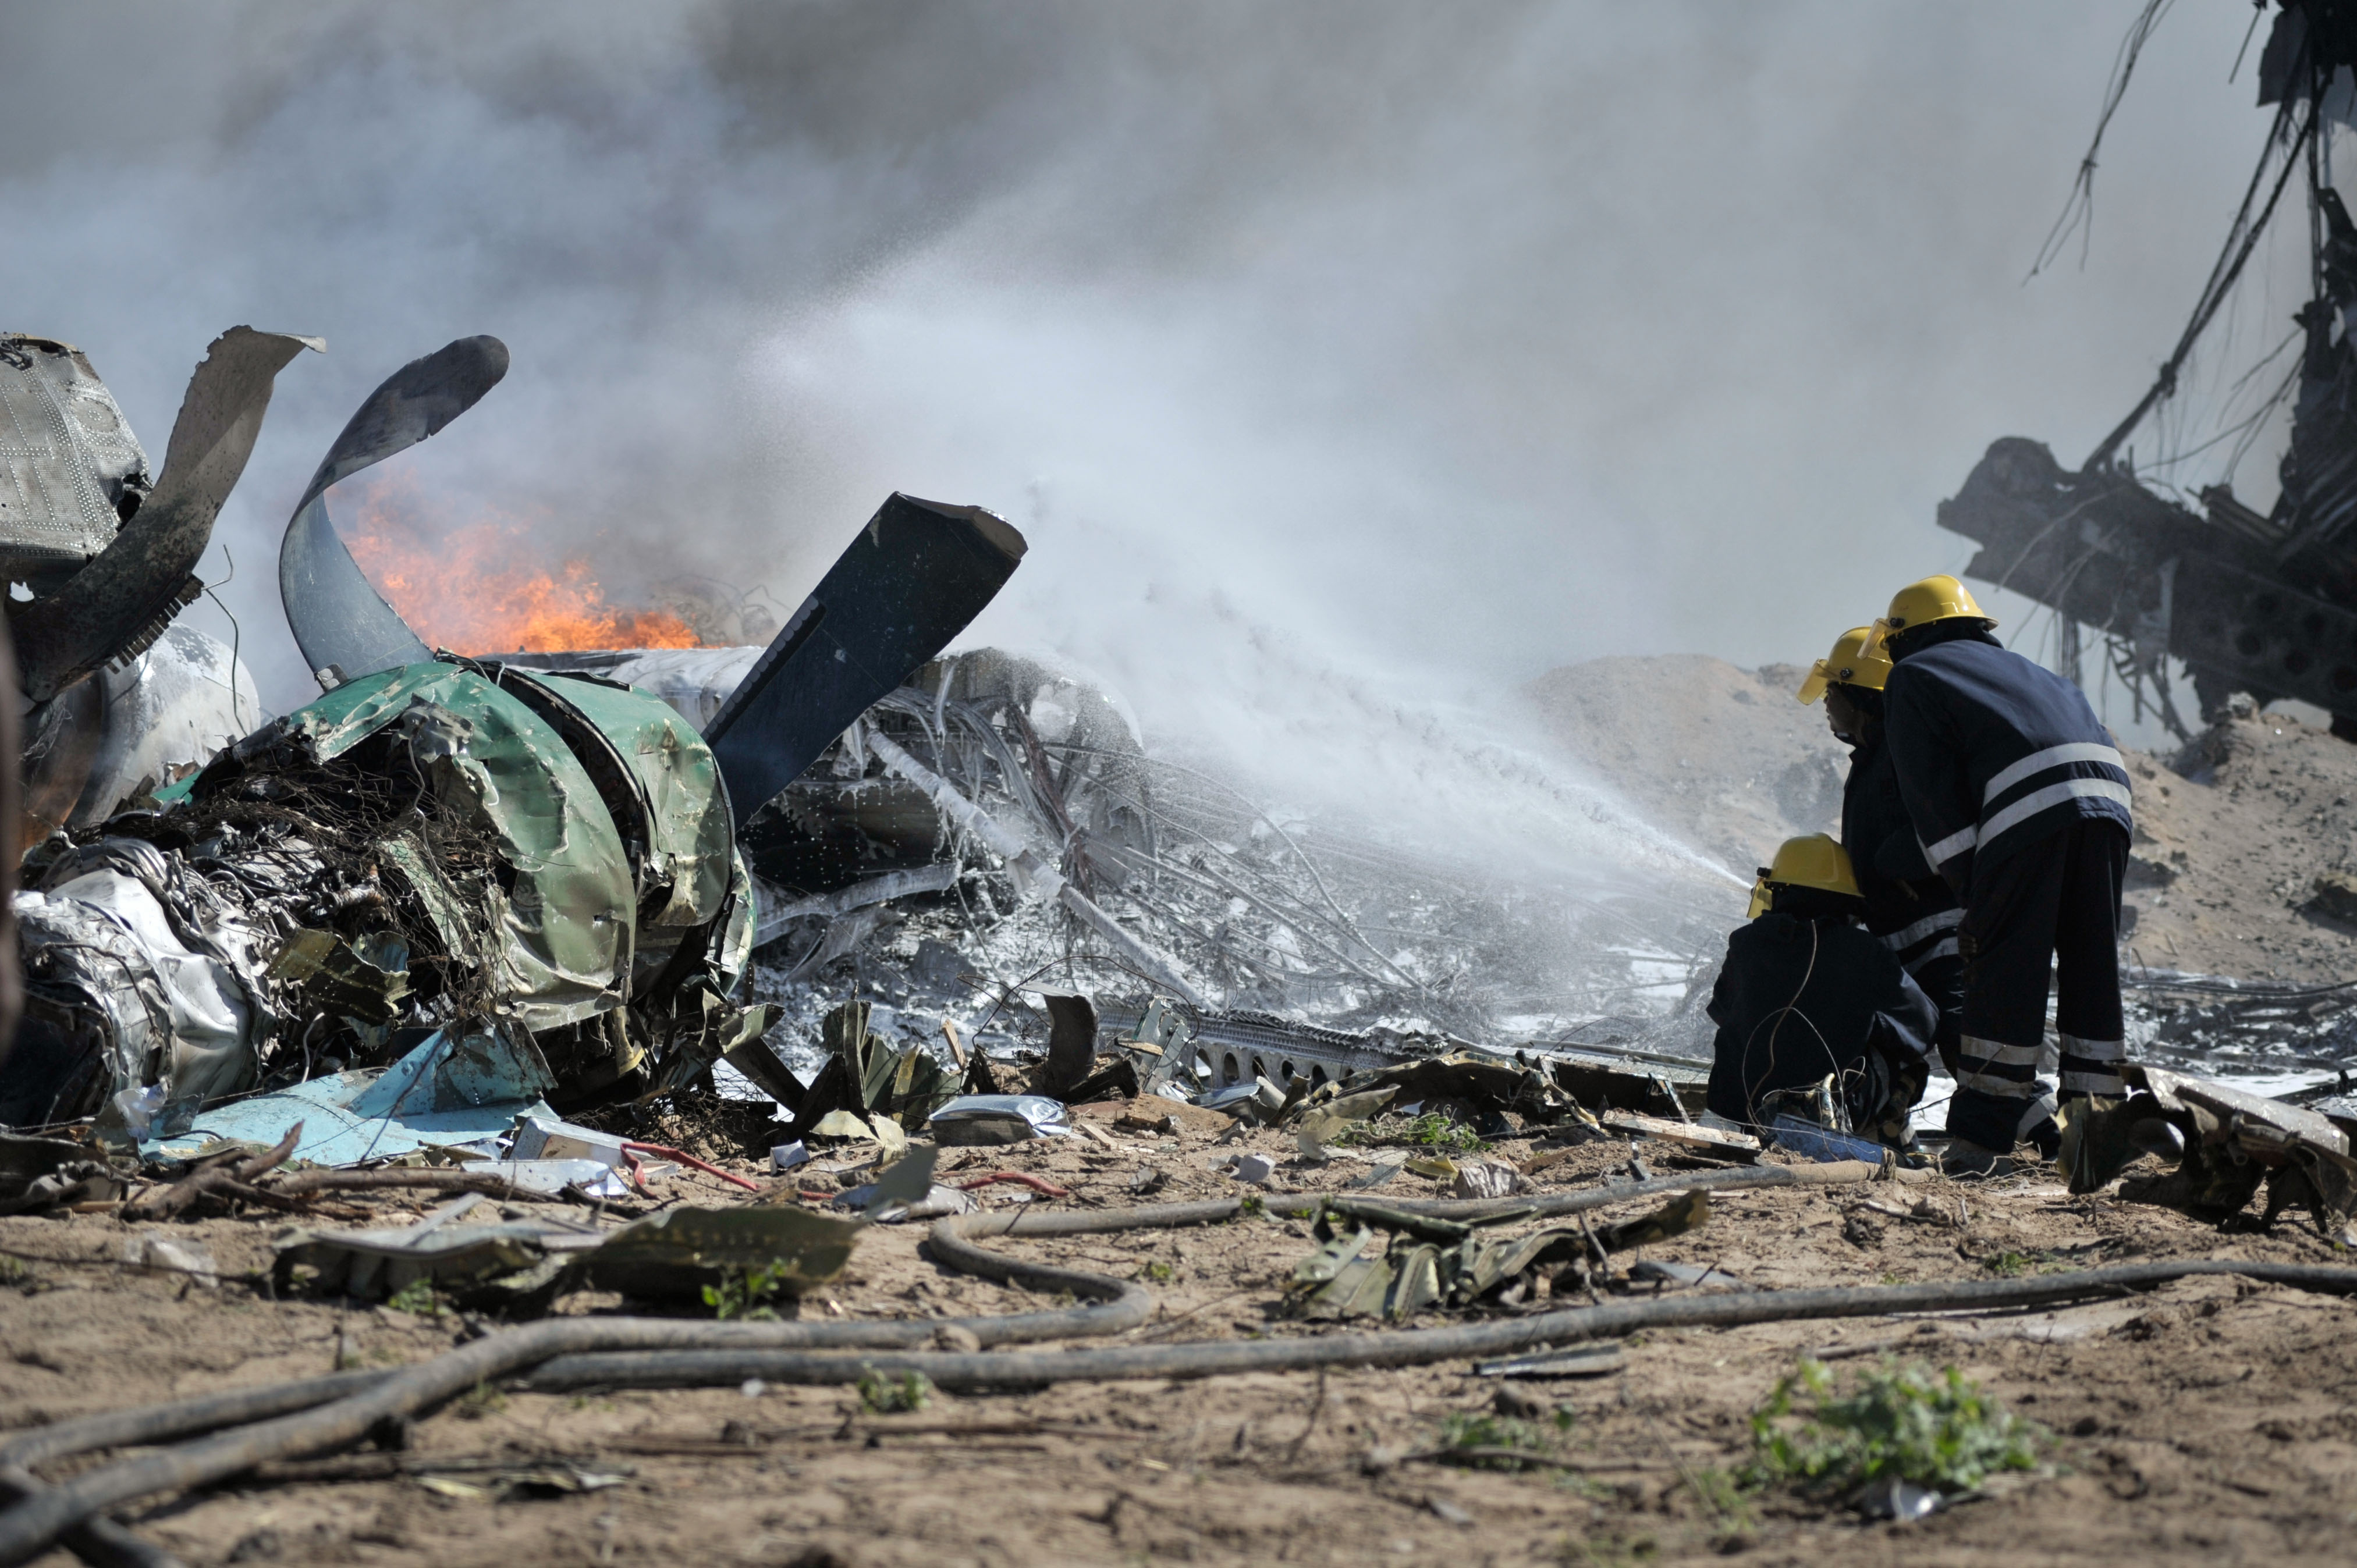 UPDATE 1-Two pilots killed in military trainer aircraft crash in Algeria